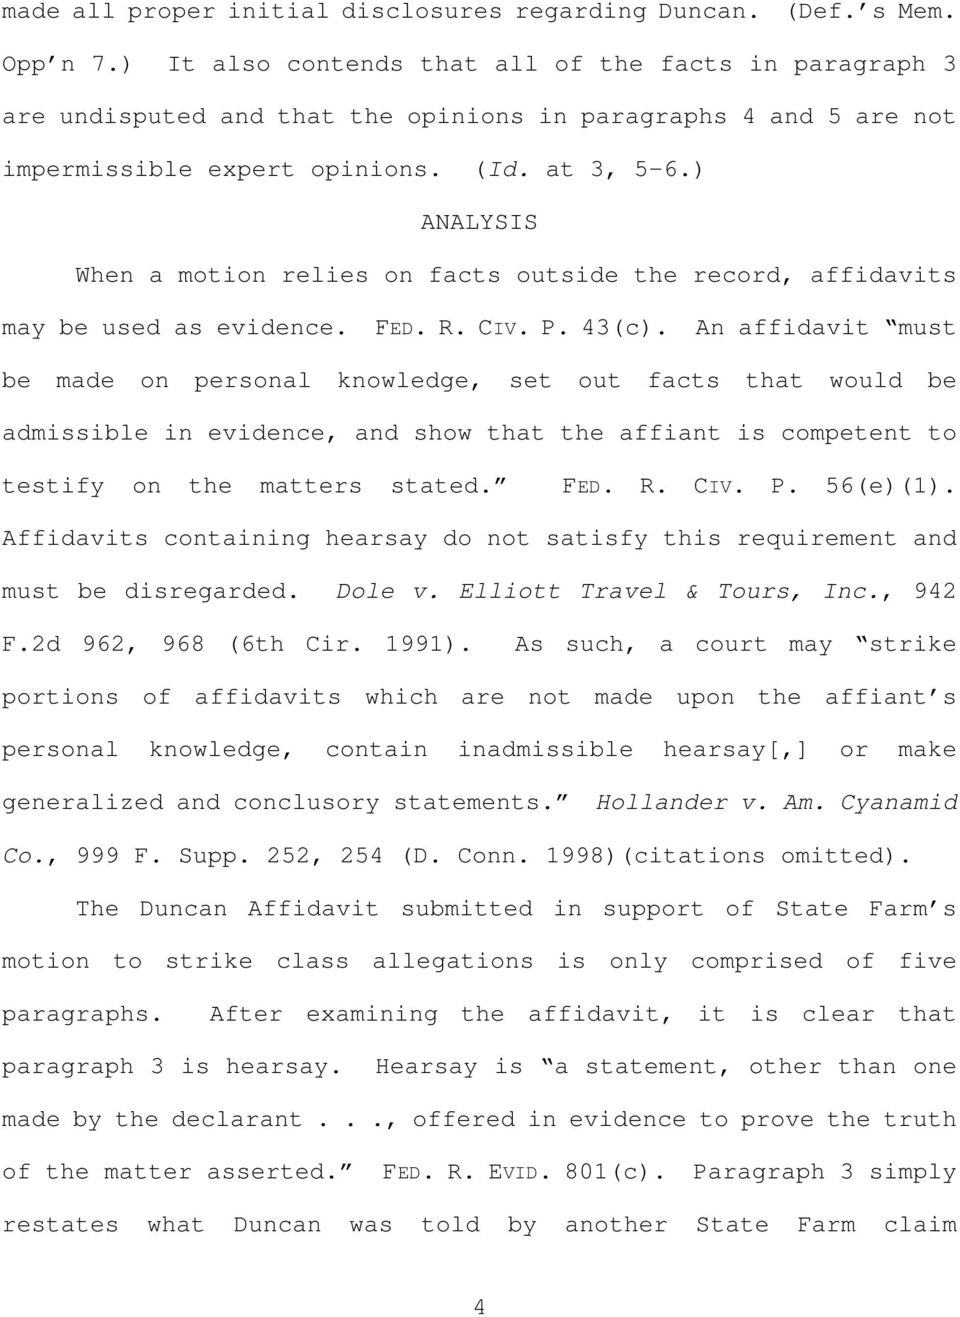 ANALYSIS When a motion relies on facts outside the record, affidavits may be used as evidence. FED. R. CIV. P. 43(c.